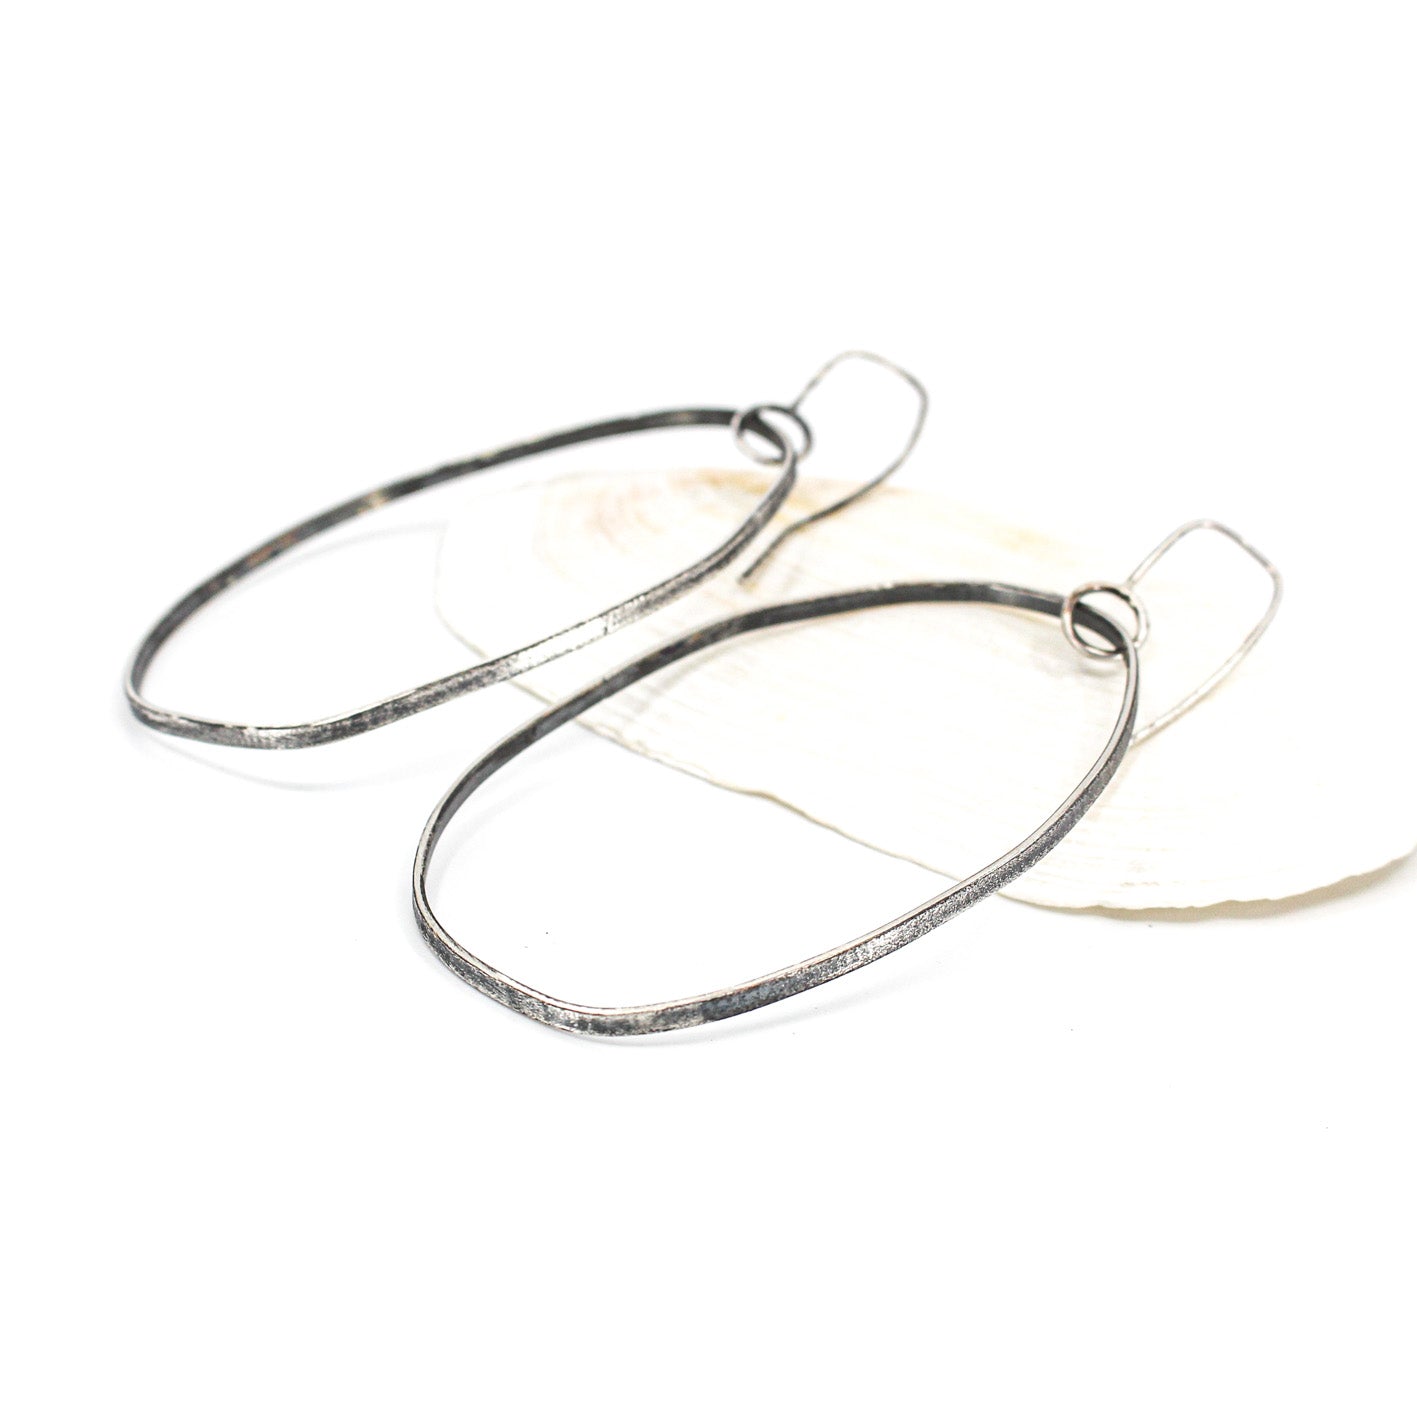 large minimalist dangling silver earrings • textured • eco sterling silver • oxidised